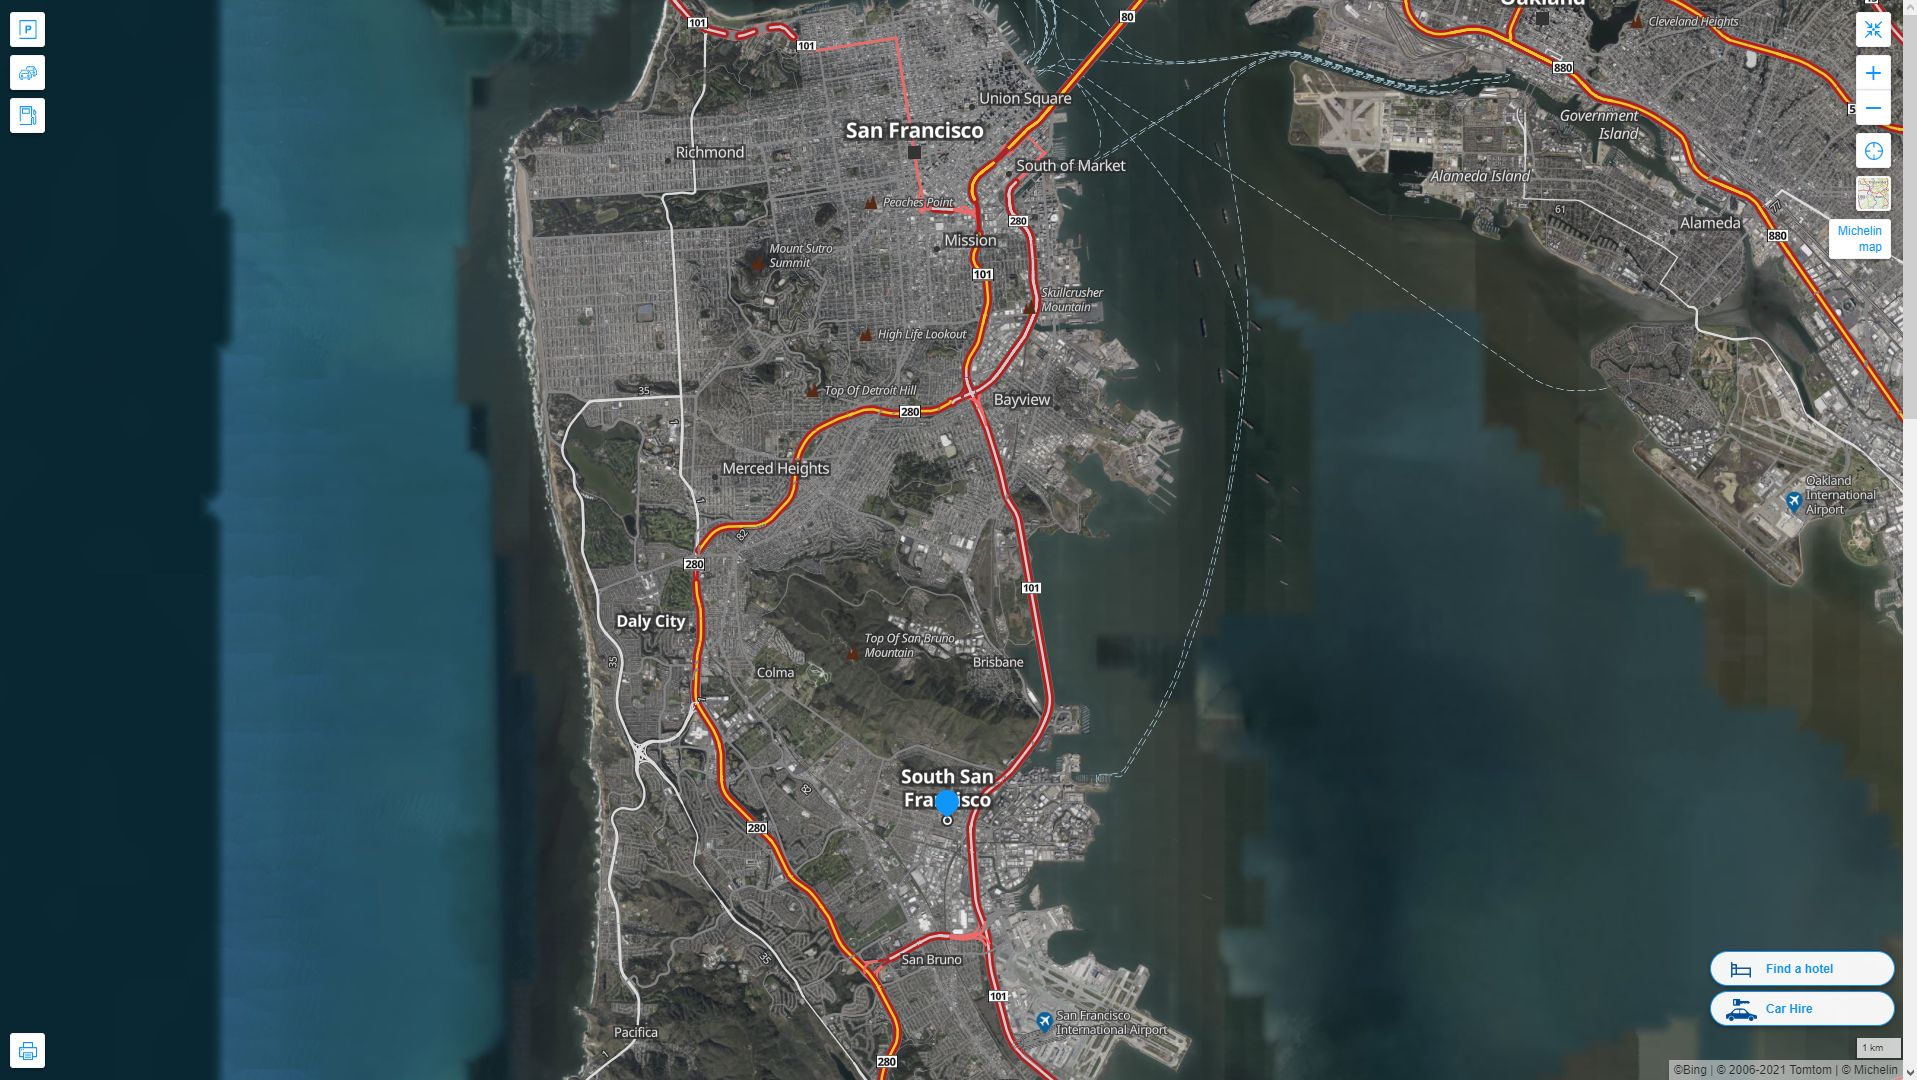 South San Francisco California Highway and Road Map with Satellite View